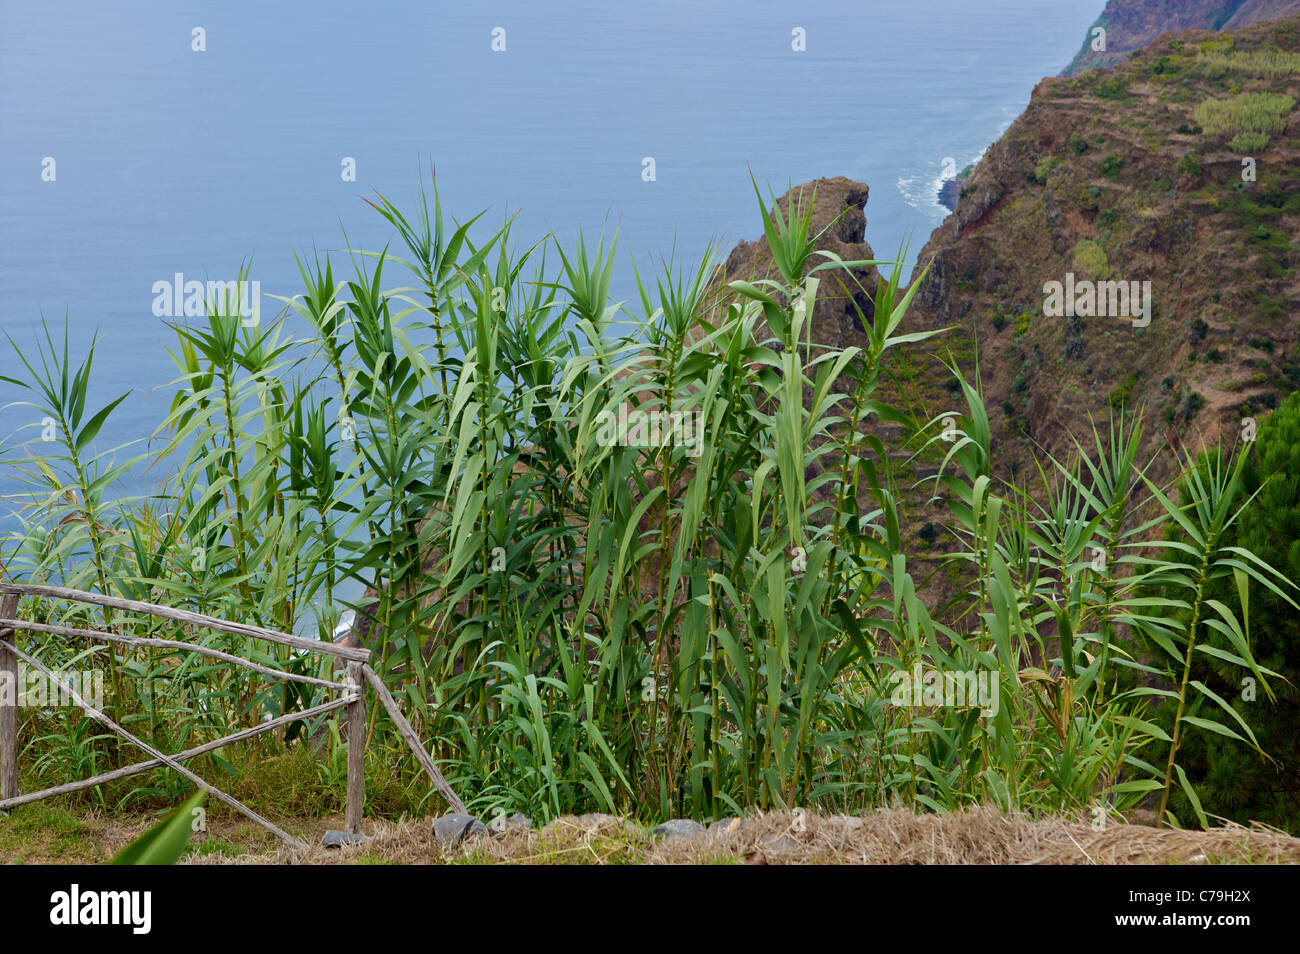 Sugarcanes growing wild in Madeira Portugal Stock Photo